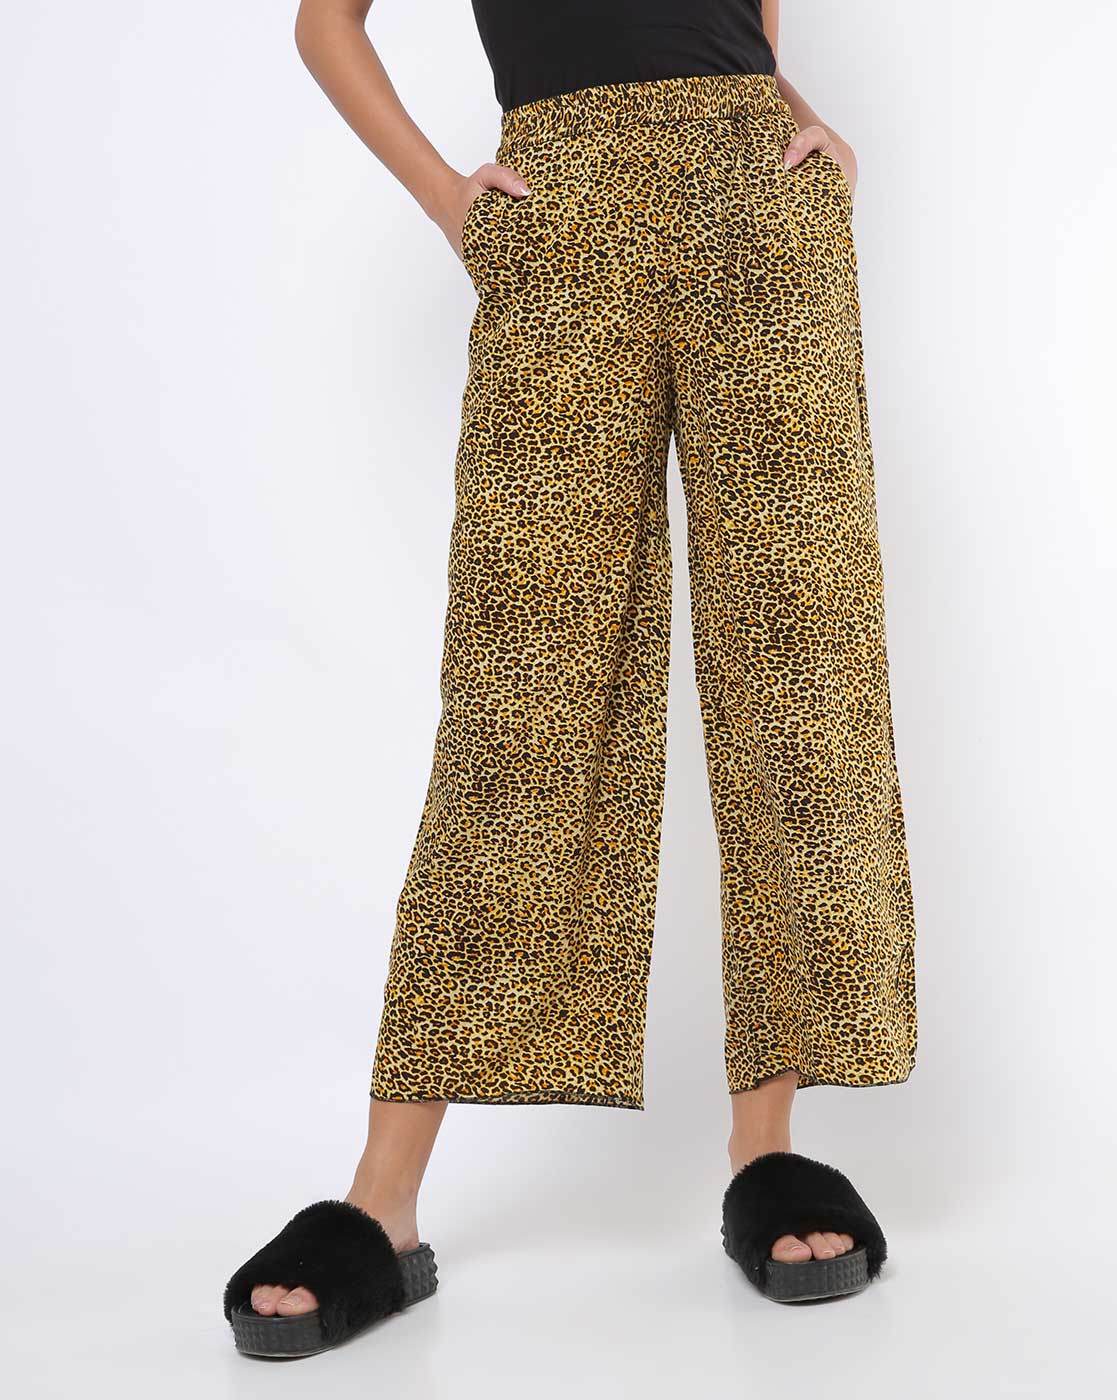 Joey Palazzo Trousers  Dancing Leopard Lime Leopard Love Cherish   Dancing Leopard